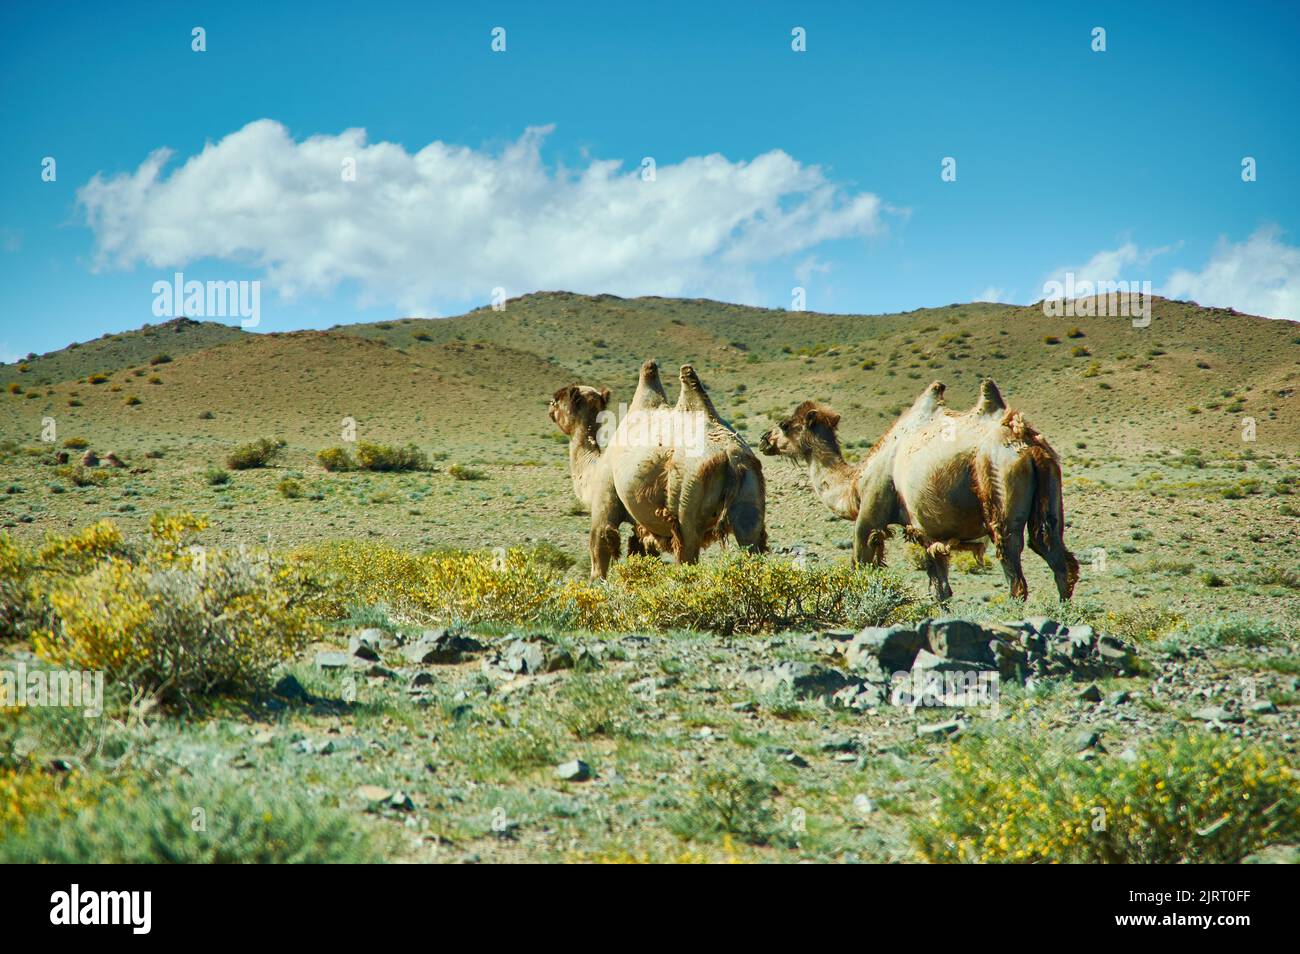 Typical Mongolian landscape wild camels, Uvs Province in Mongolia Stock Photo